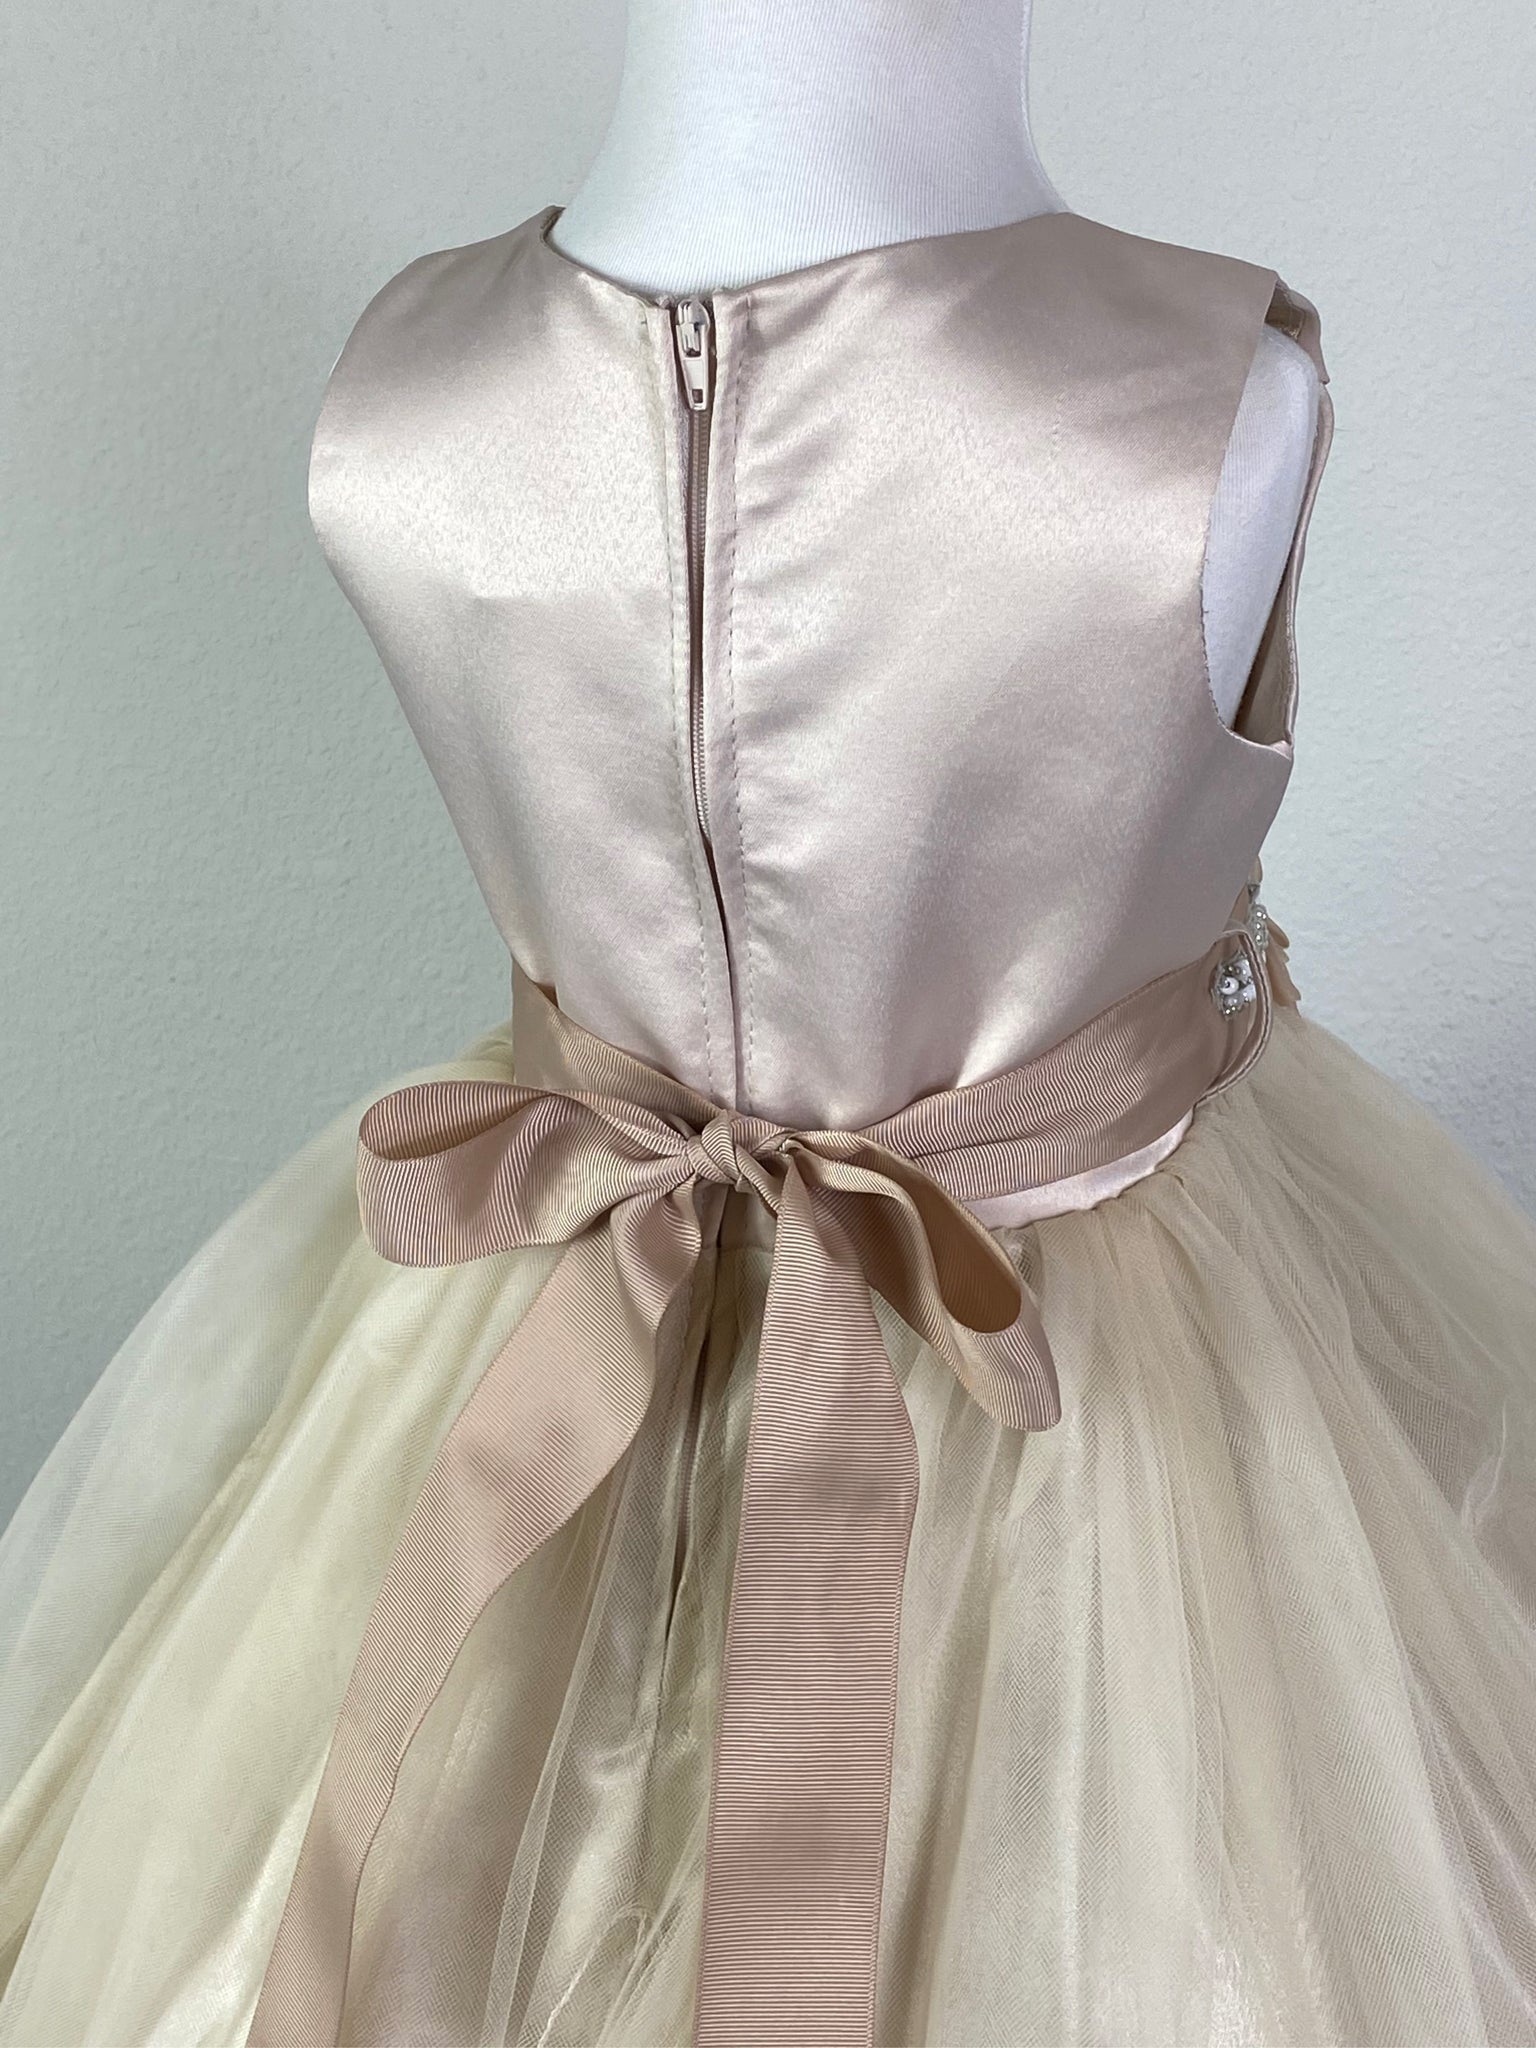 Champagne, size 2 Champagne paneled bodice Beige ribbon belt with rhinestone and bead detailing along leaves Champagne satin skirting with tulle overlay Zipper closure Dress pictured with a petticoat Petticoat not included  Choose from a tulle, cloth, or wire for best look